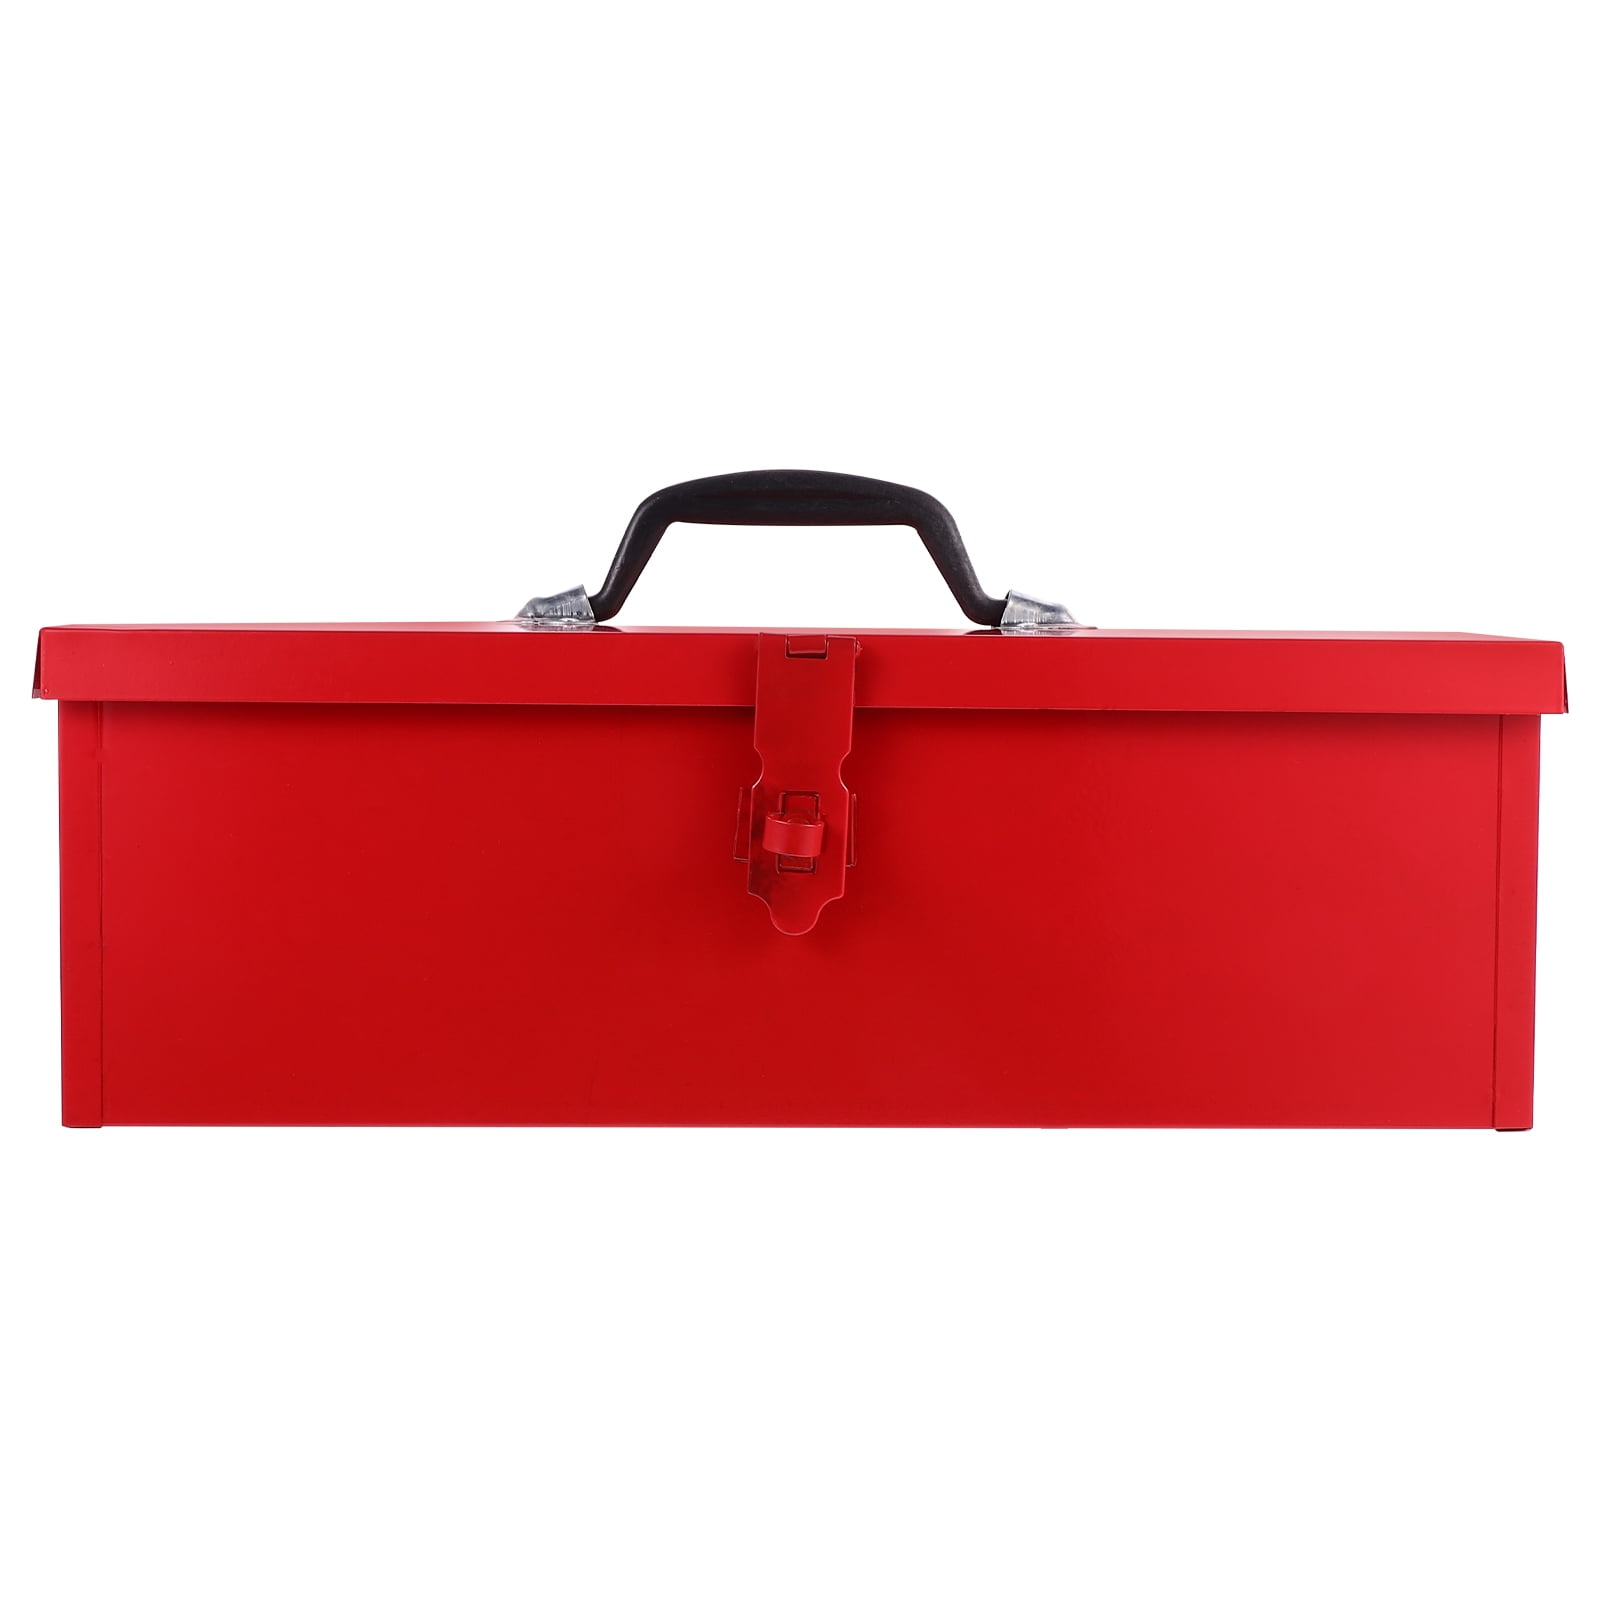 Tool Box Metal Small Organizer Portable Hip Roof Red Toolbox Tractortruck  Bed Storage Case